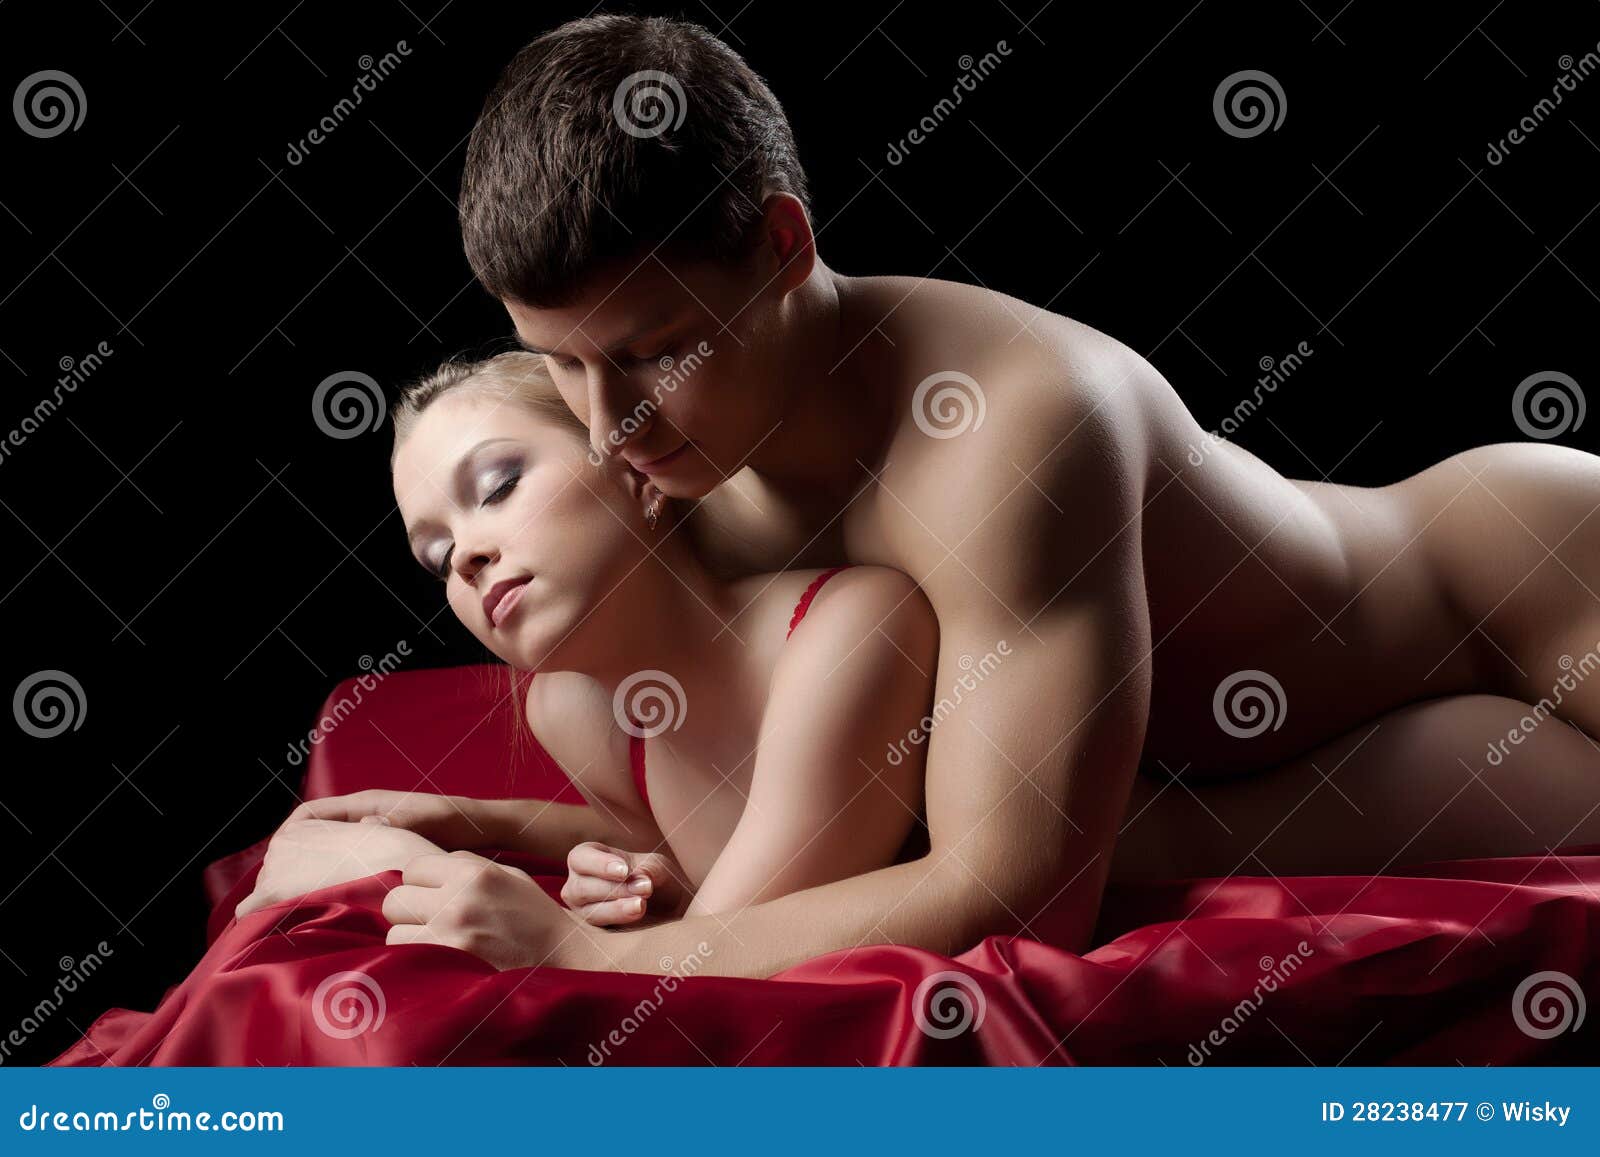 Strong men having sex with girls